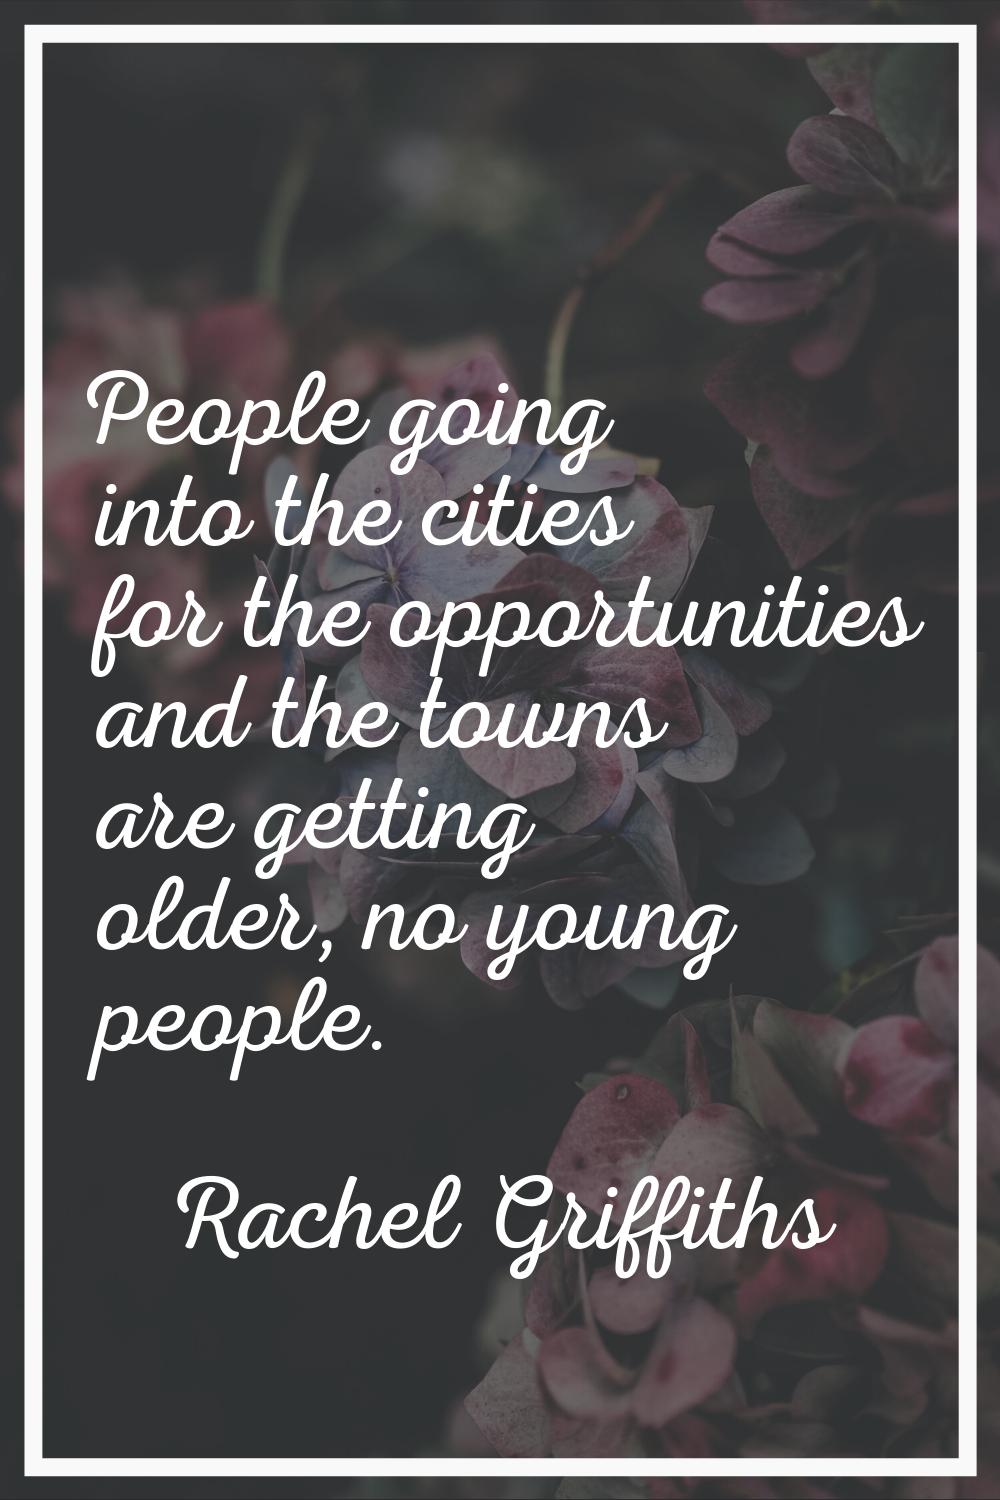 People going into the cities for the opportunities and the towns are getting older, no young people